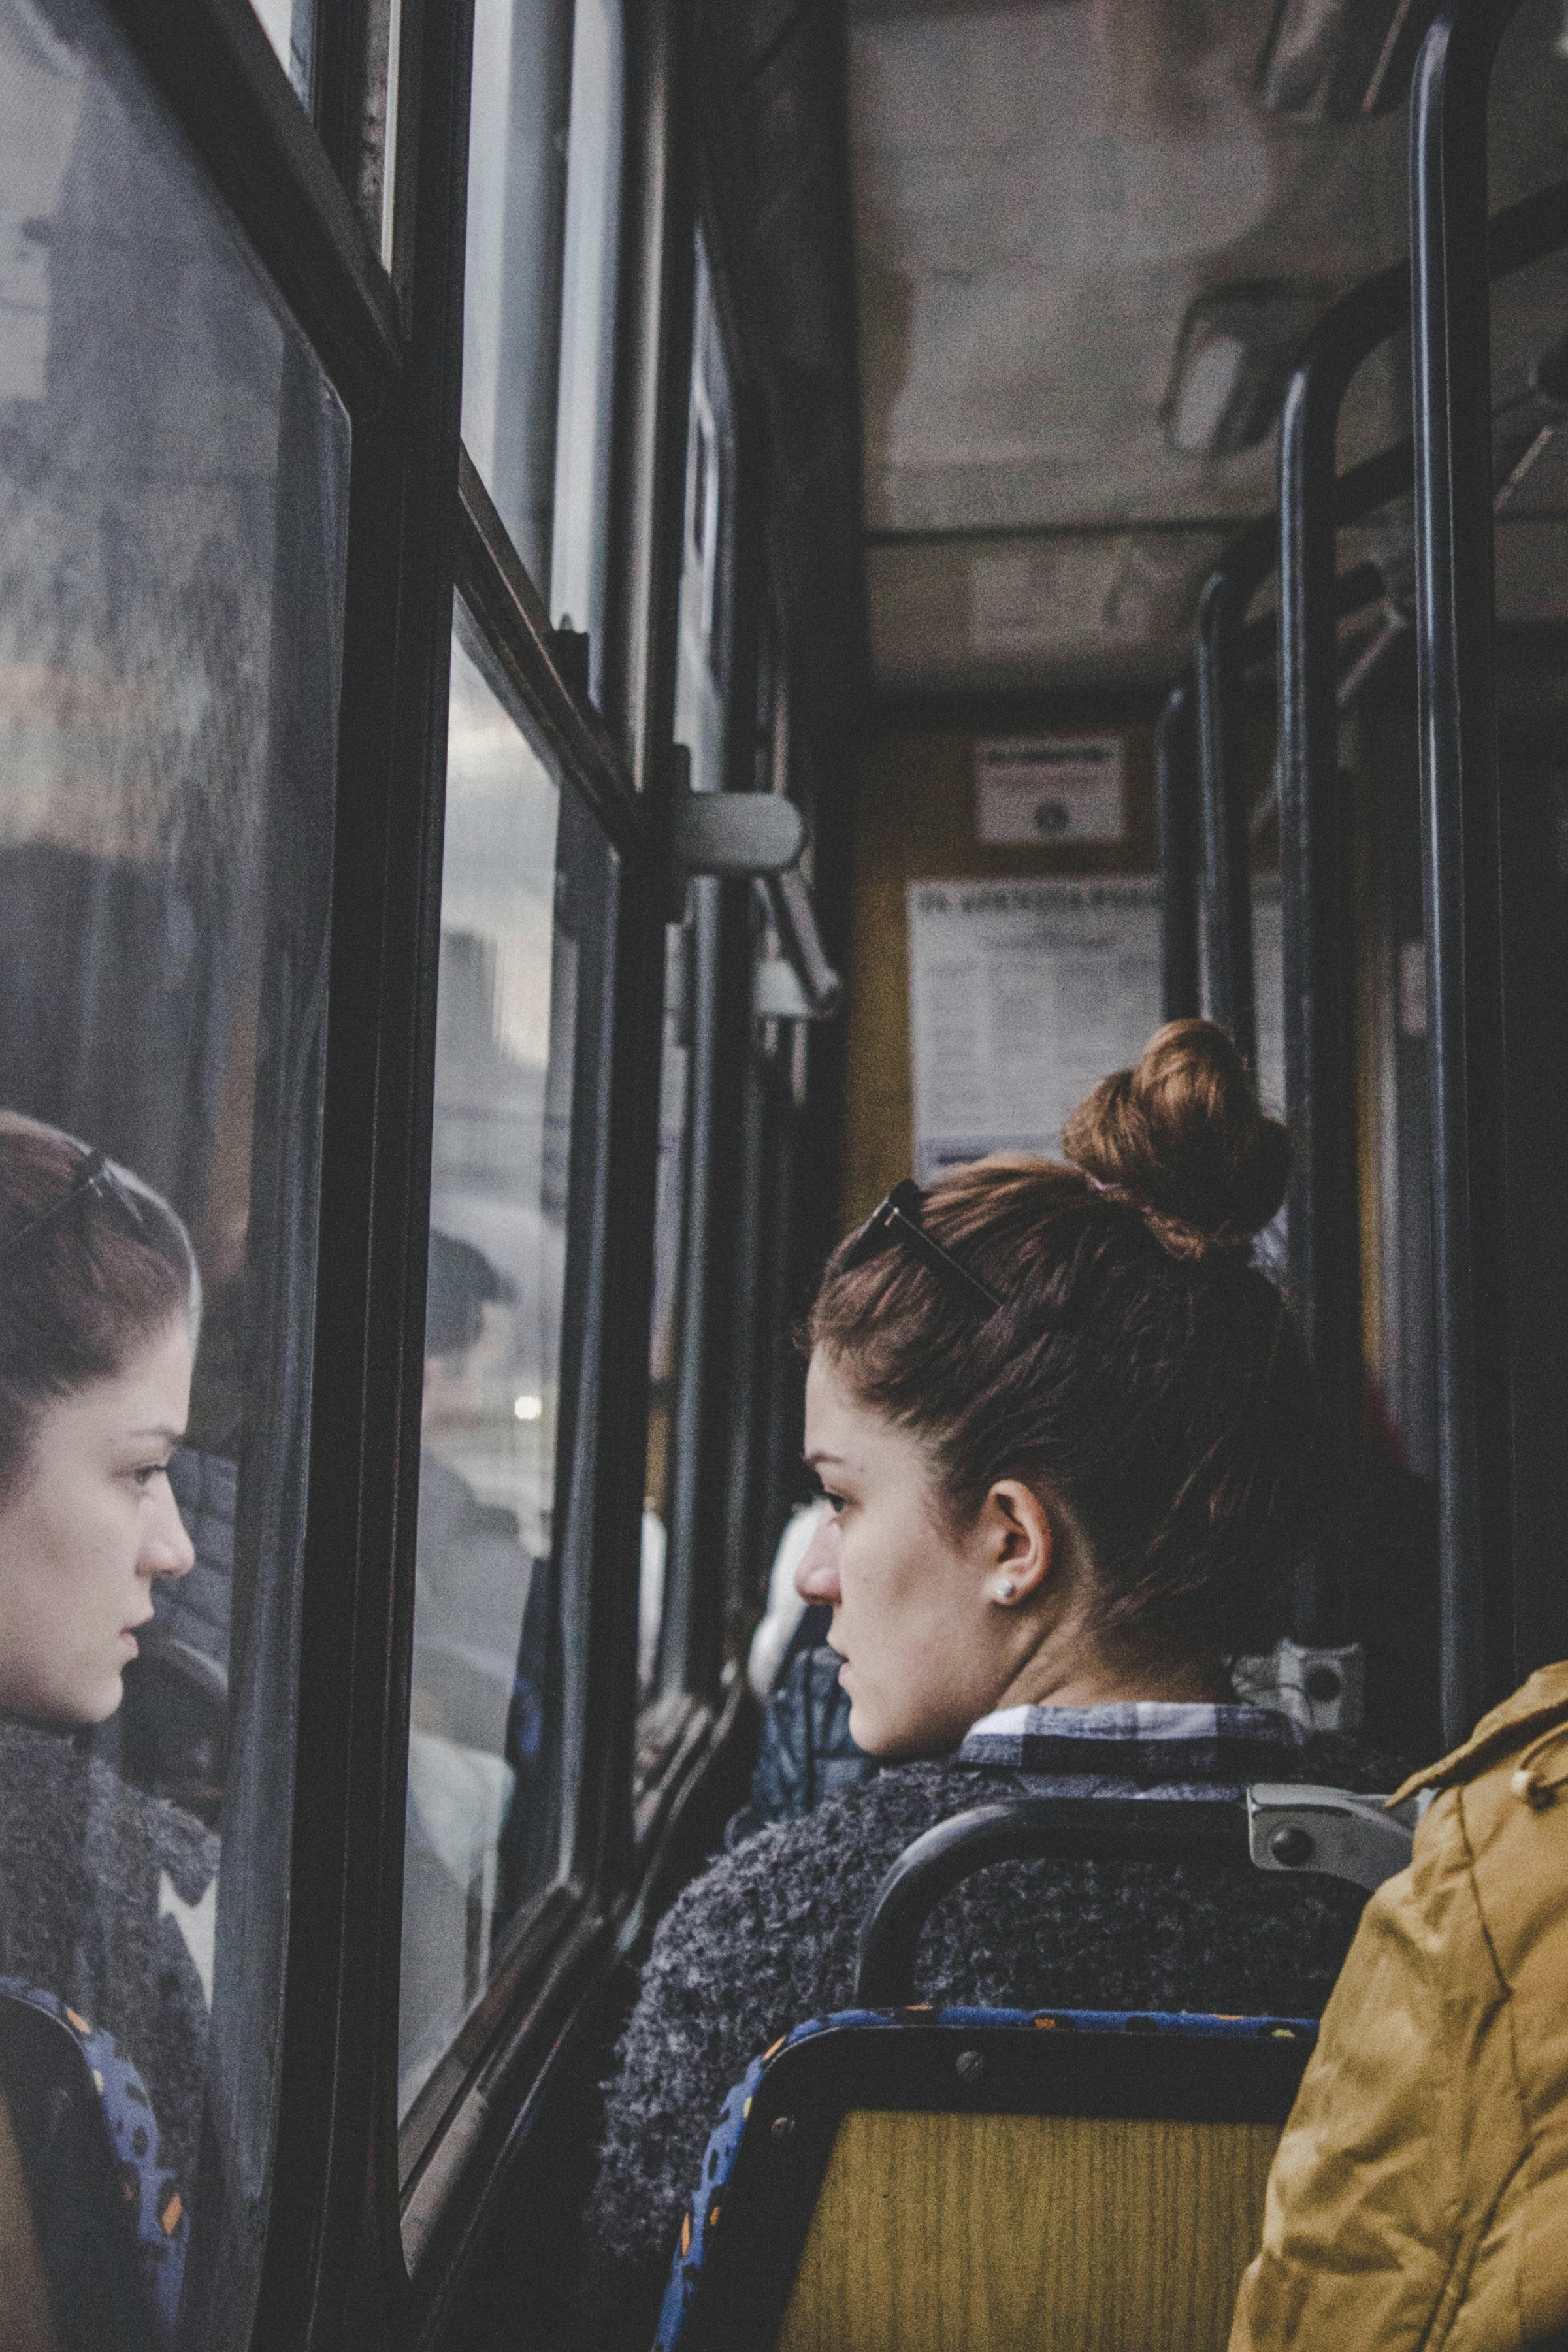 A woman looking out of a bus window | Source: Unsplash